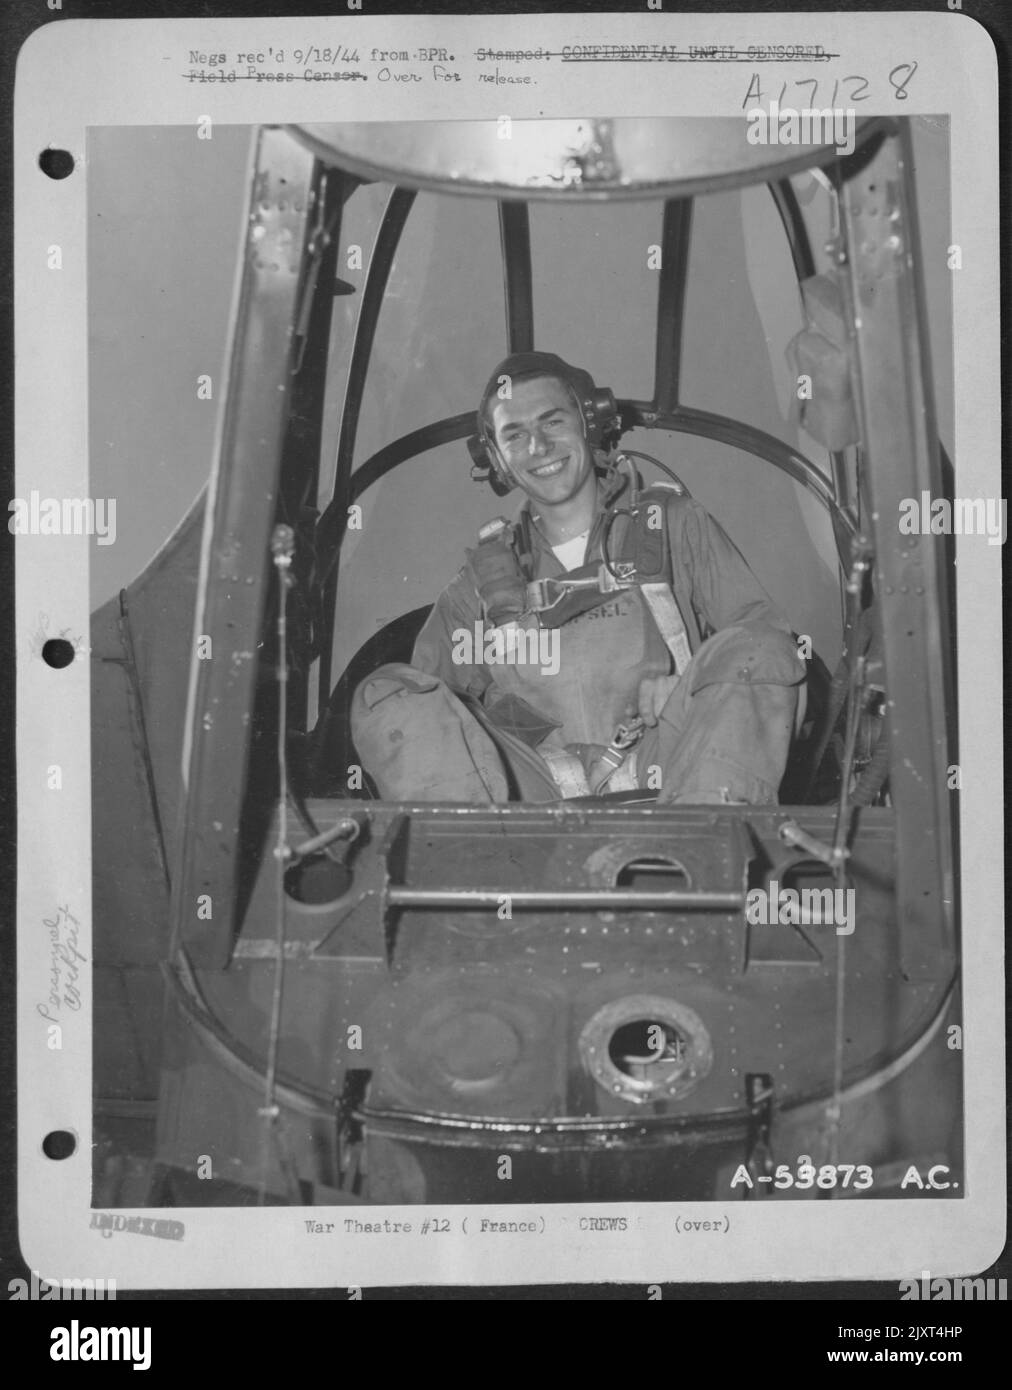 FRANCE-Lt. Edward Kespel of Chicago, Ill., radar observer of the P-61 Black Widow, a 9th Air force night fighter 'Borrowed Time,' is in the rear cockpit of his plane as it is ready to go on a mission in the everlasting crushing of the German forces. Stock Photo